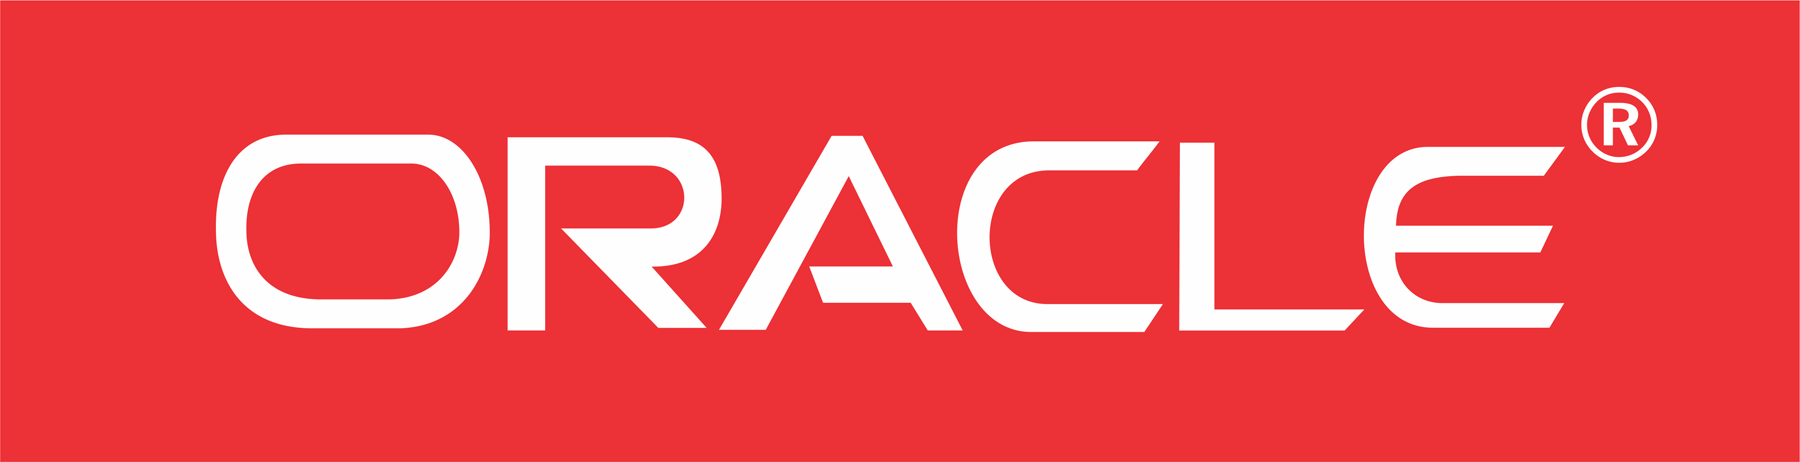 Oracle Corporation Logo - Oracle Logo, Oracle Symbol, Meaning, History and Evolution